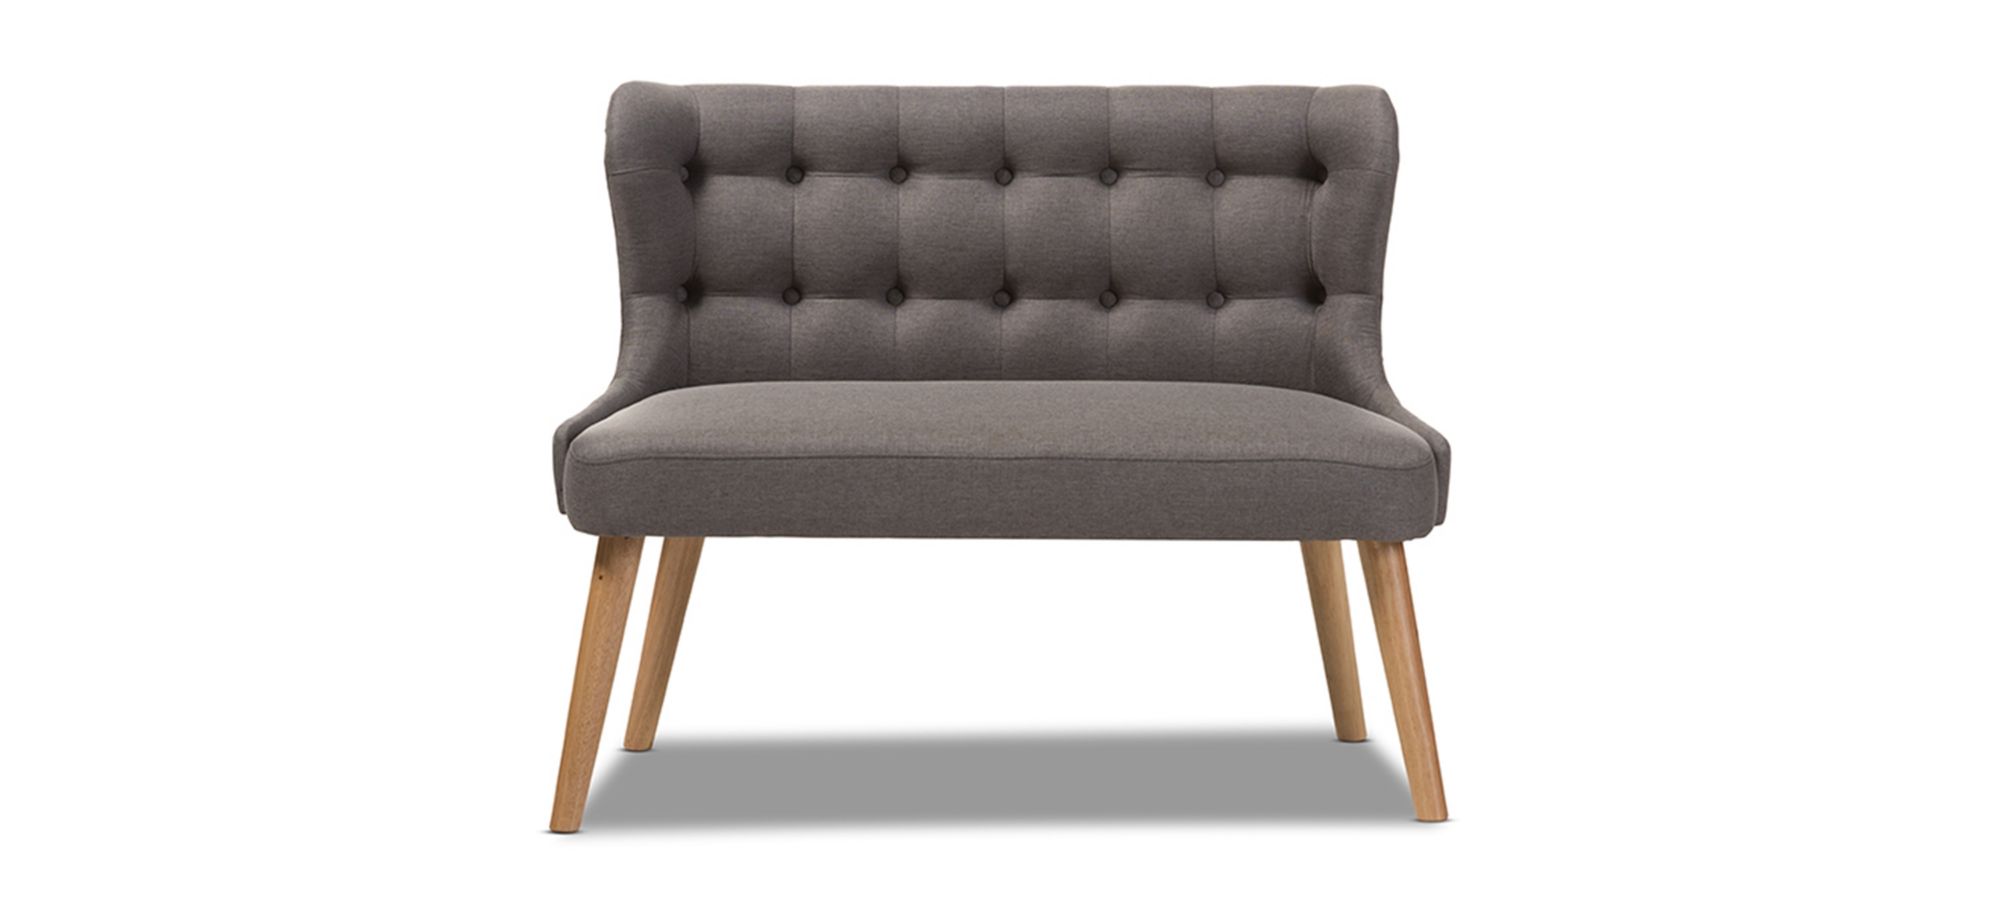 Melody Settee Bench in Gray by Wholesale Interiors